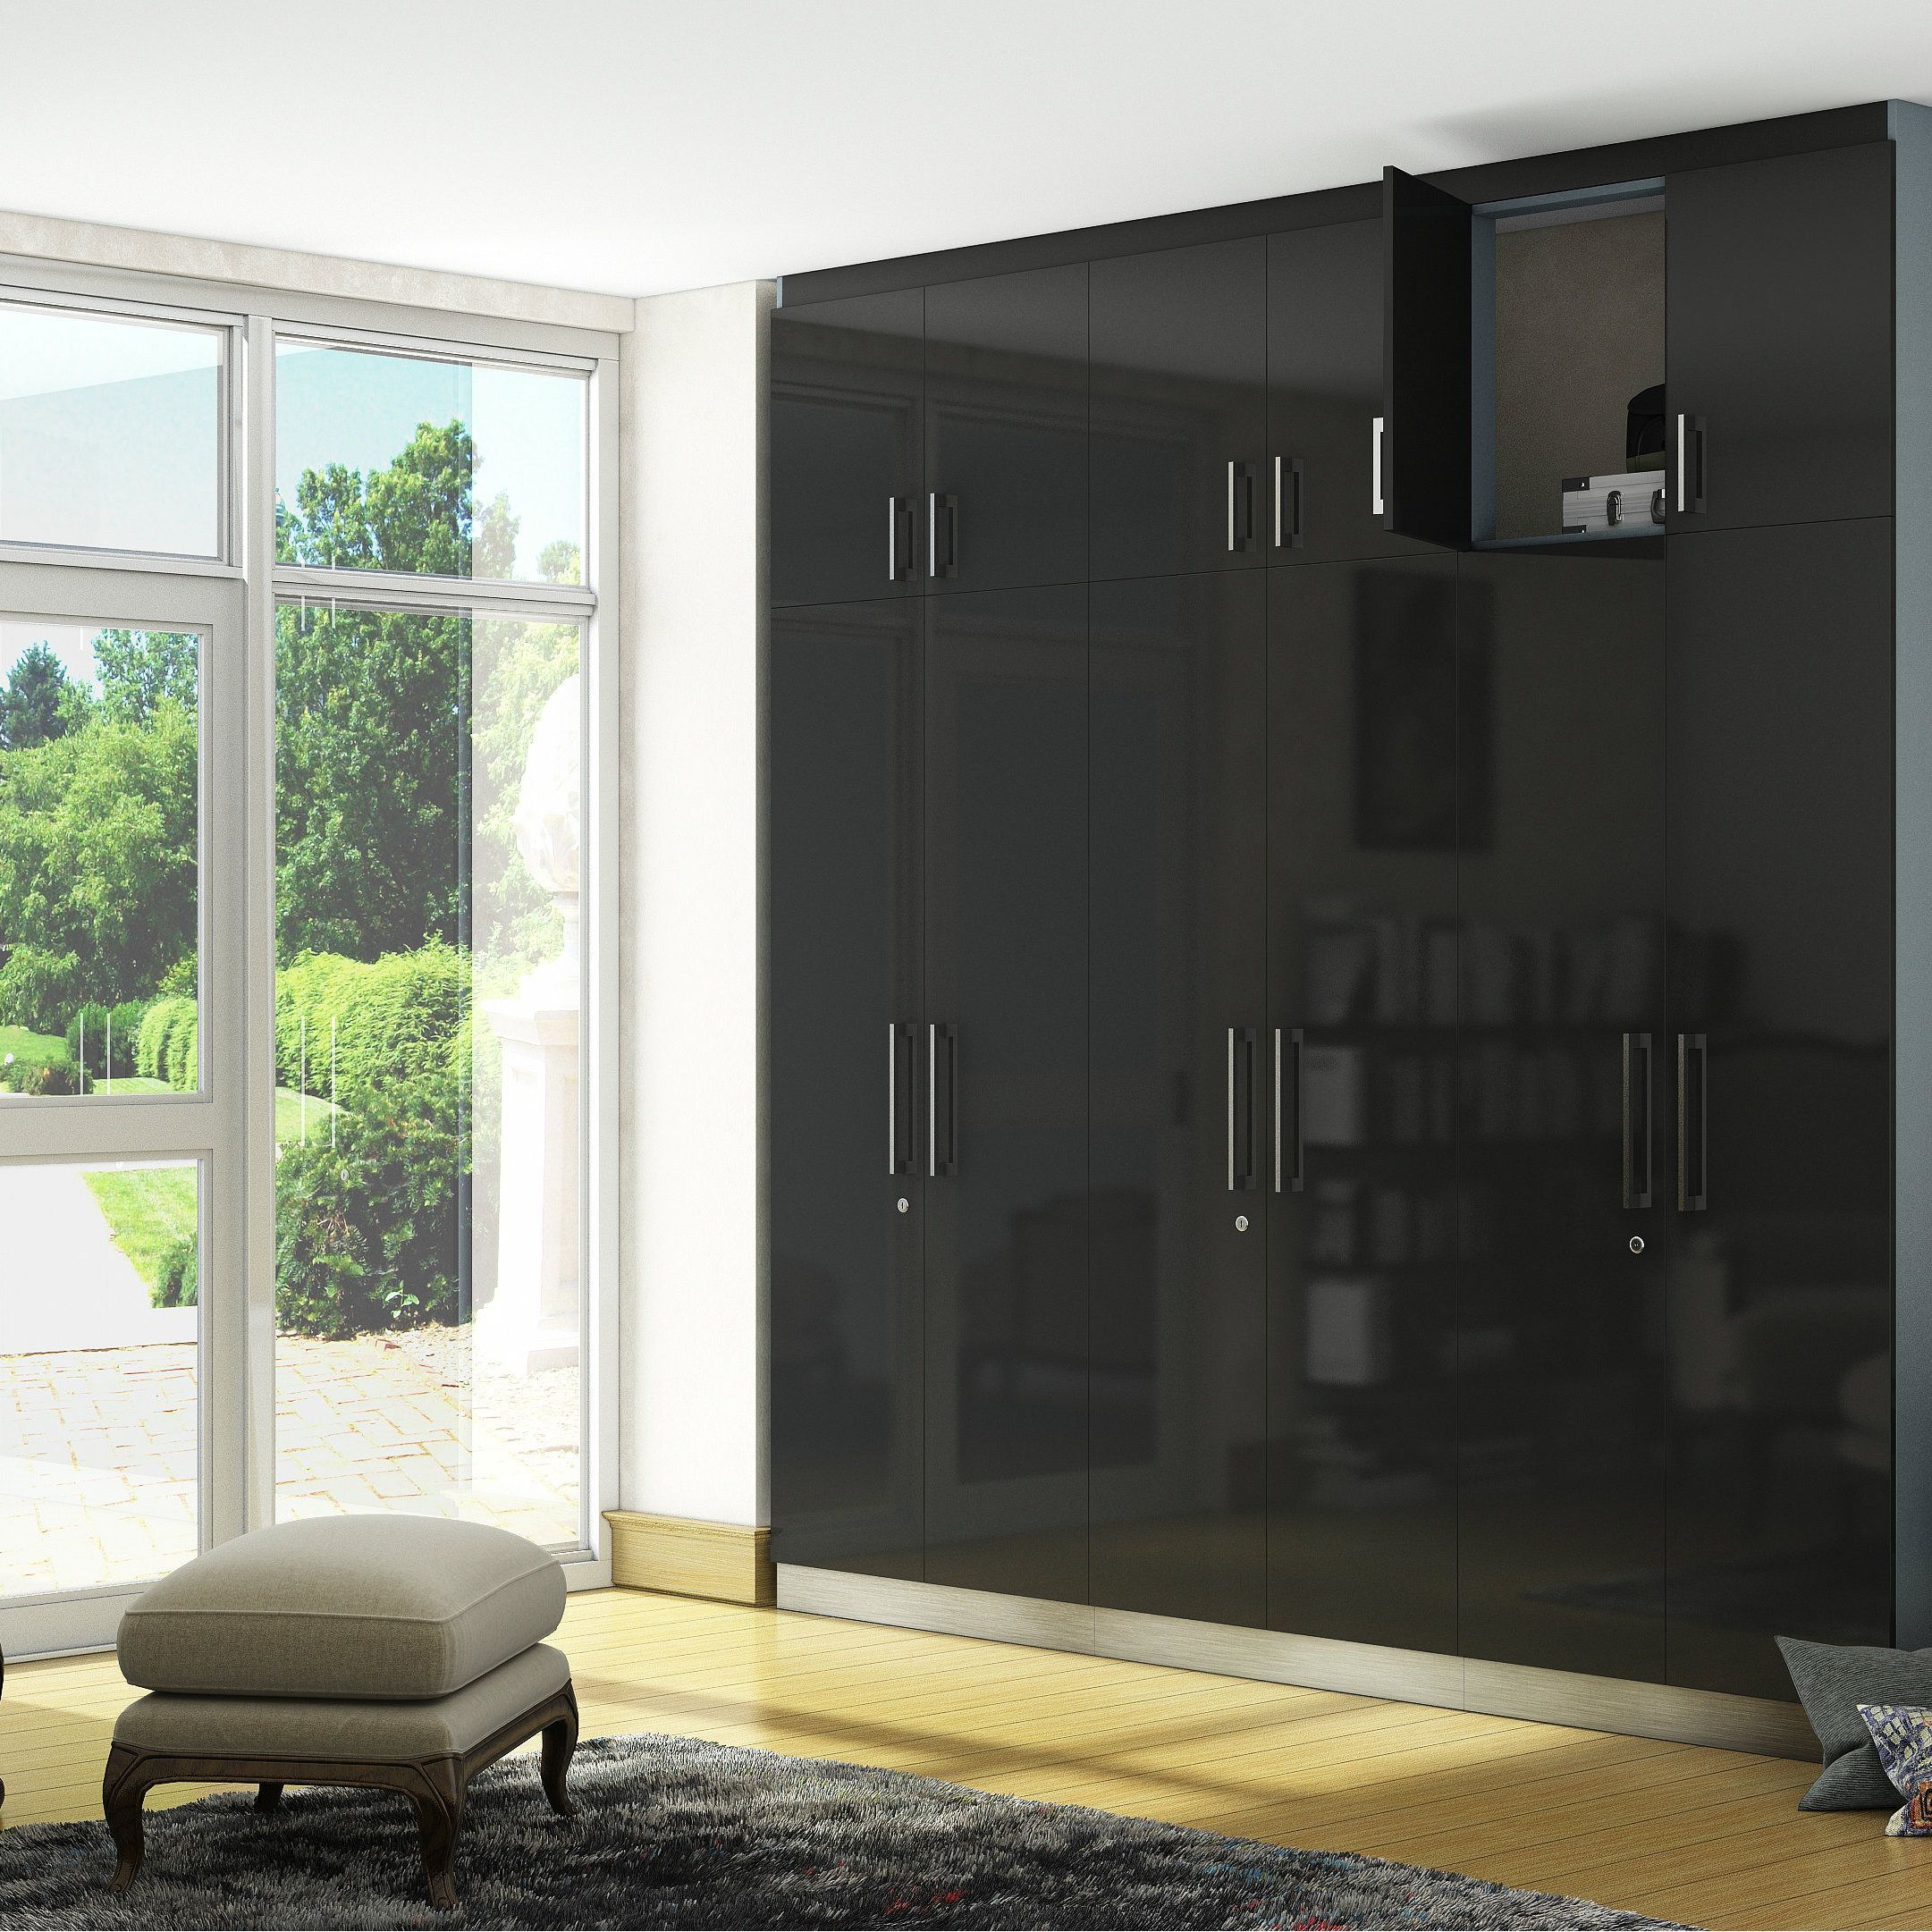 A Glossy Black Wardrobe That Is Every Bit As Impressive And Functional |  Wardrobe Design, Furniture Design, Grey Wardrobe Within Black Gloss Wardrobes (View 7 of 20)